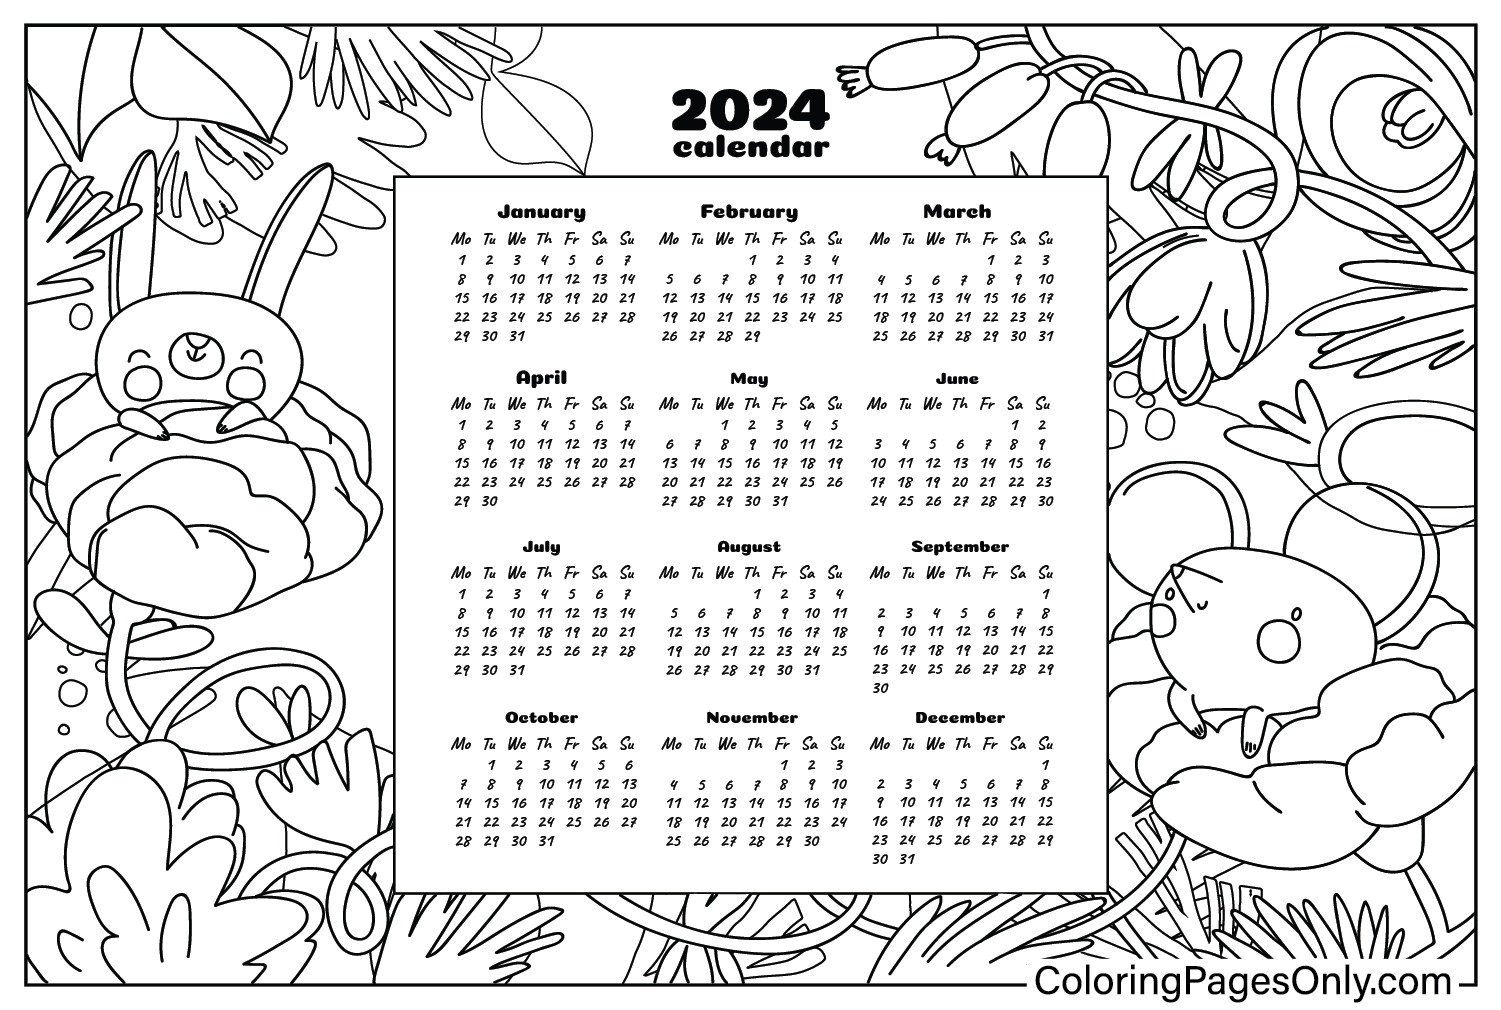 Calendar 2024 Coloring Page Free Printable Coloring Pages